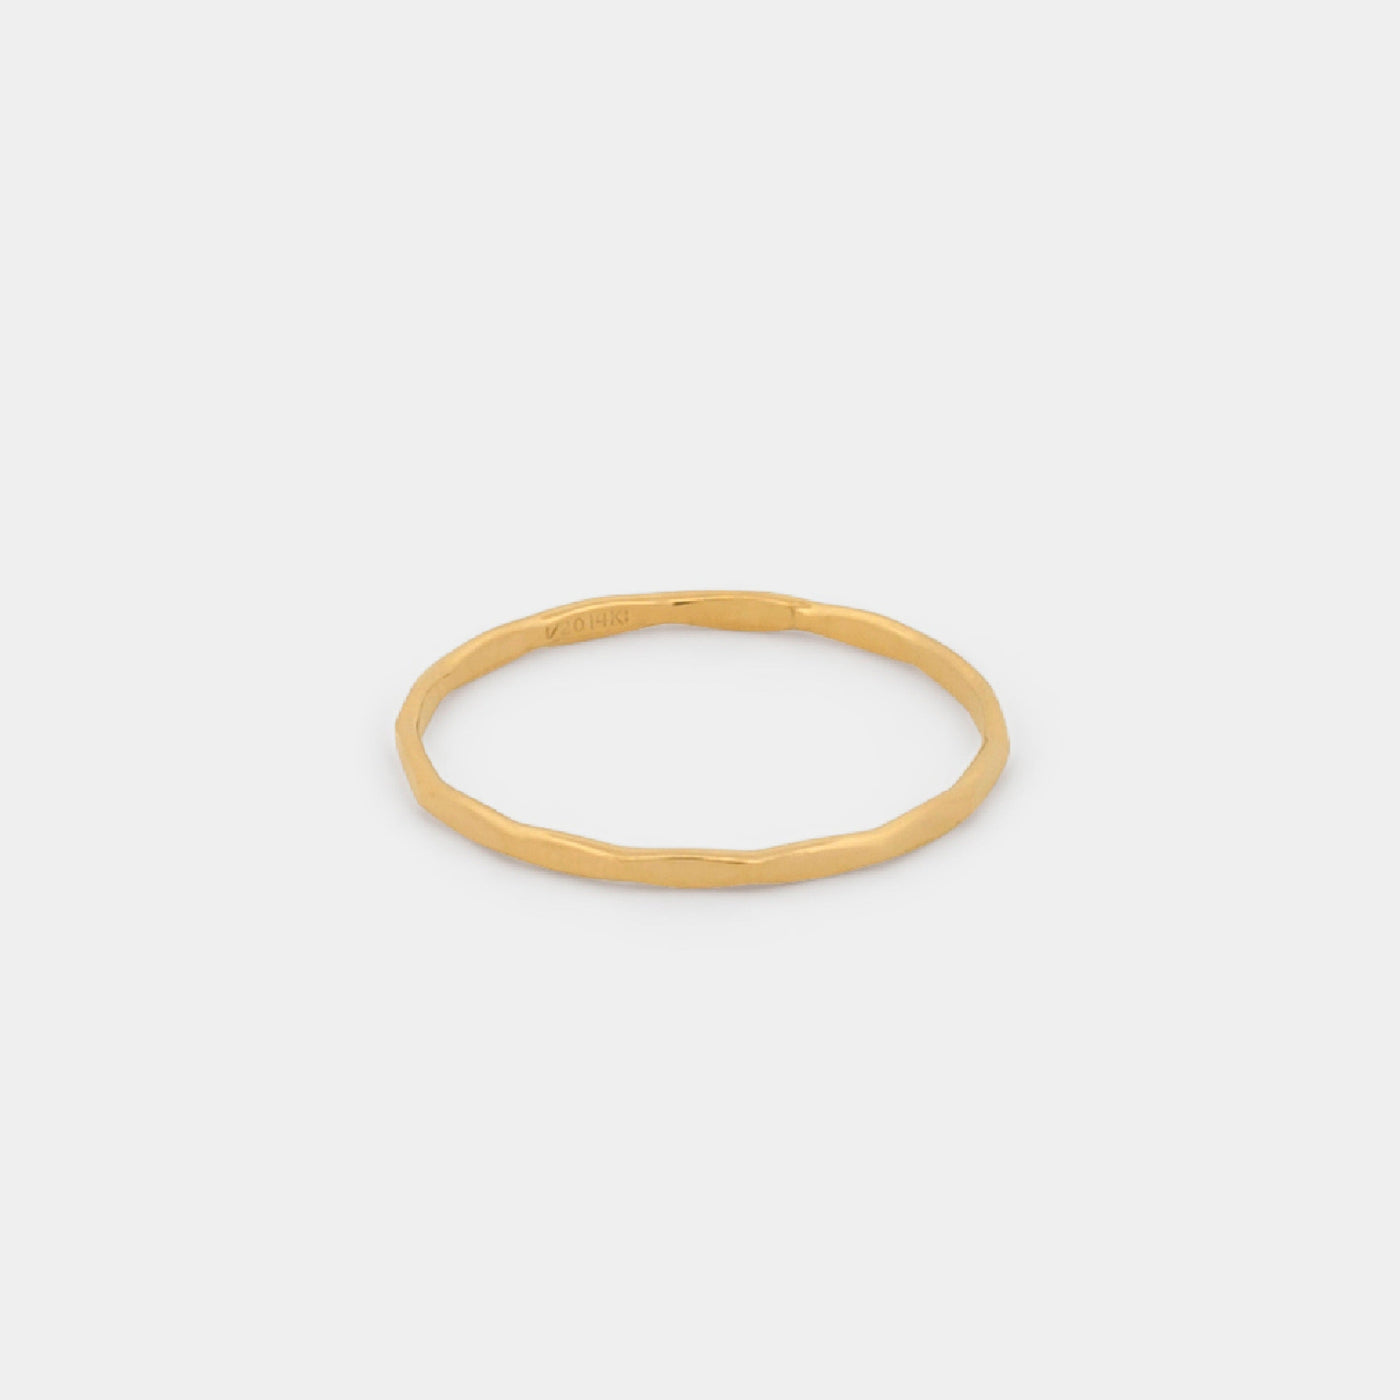 faceted ring in 14k gold fill